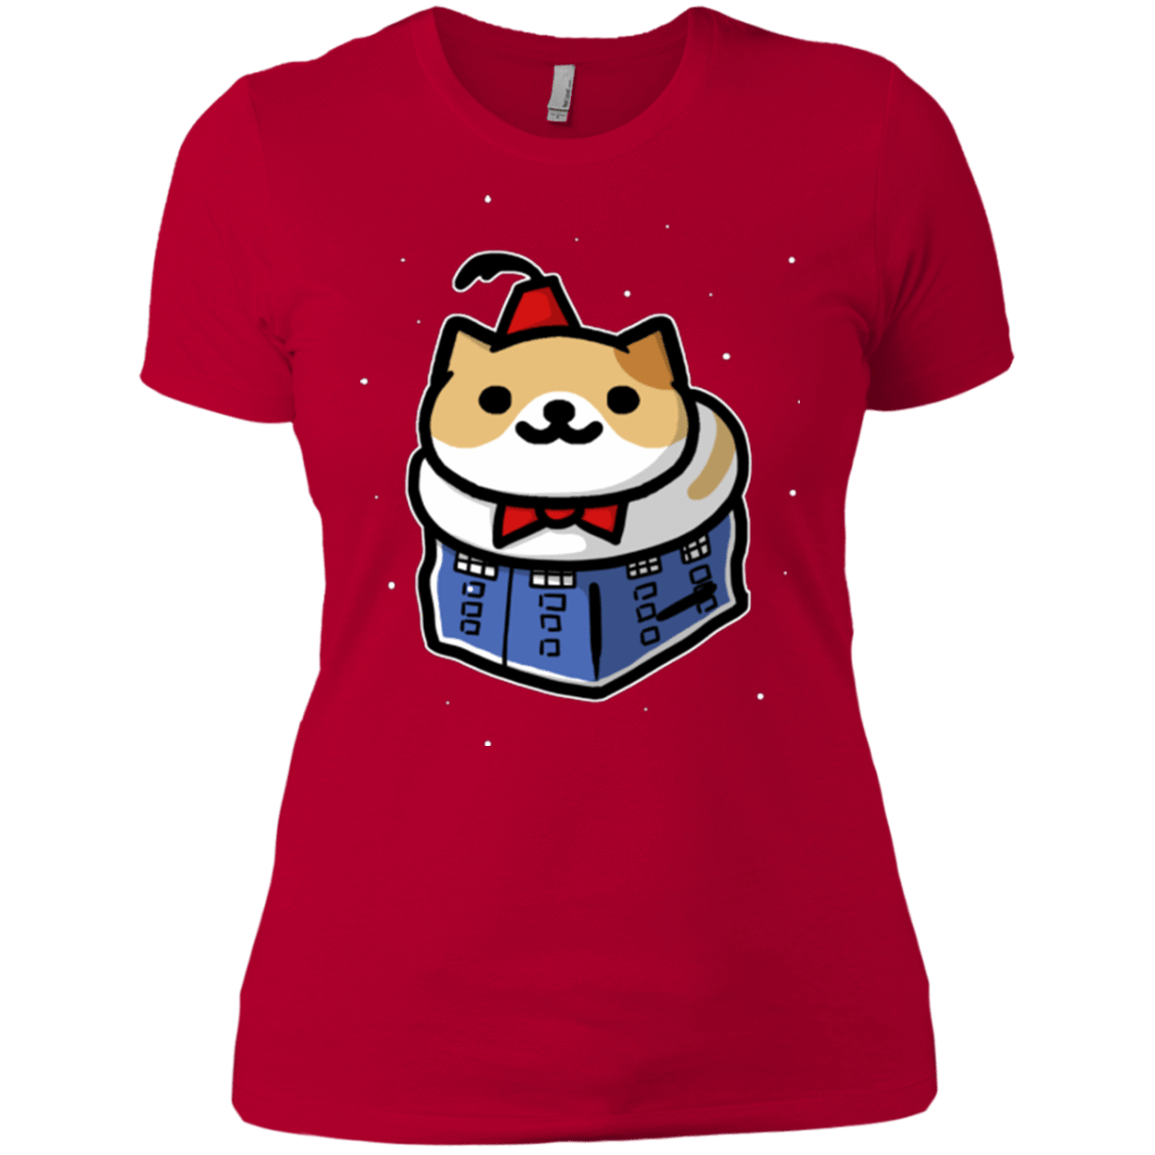 T-Shirts Red / X-Small Bigger On The Inside Women's Premium T-Shirt